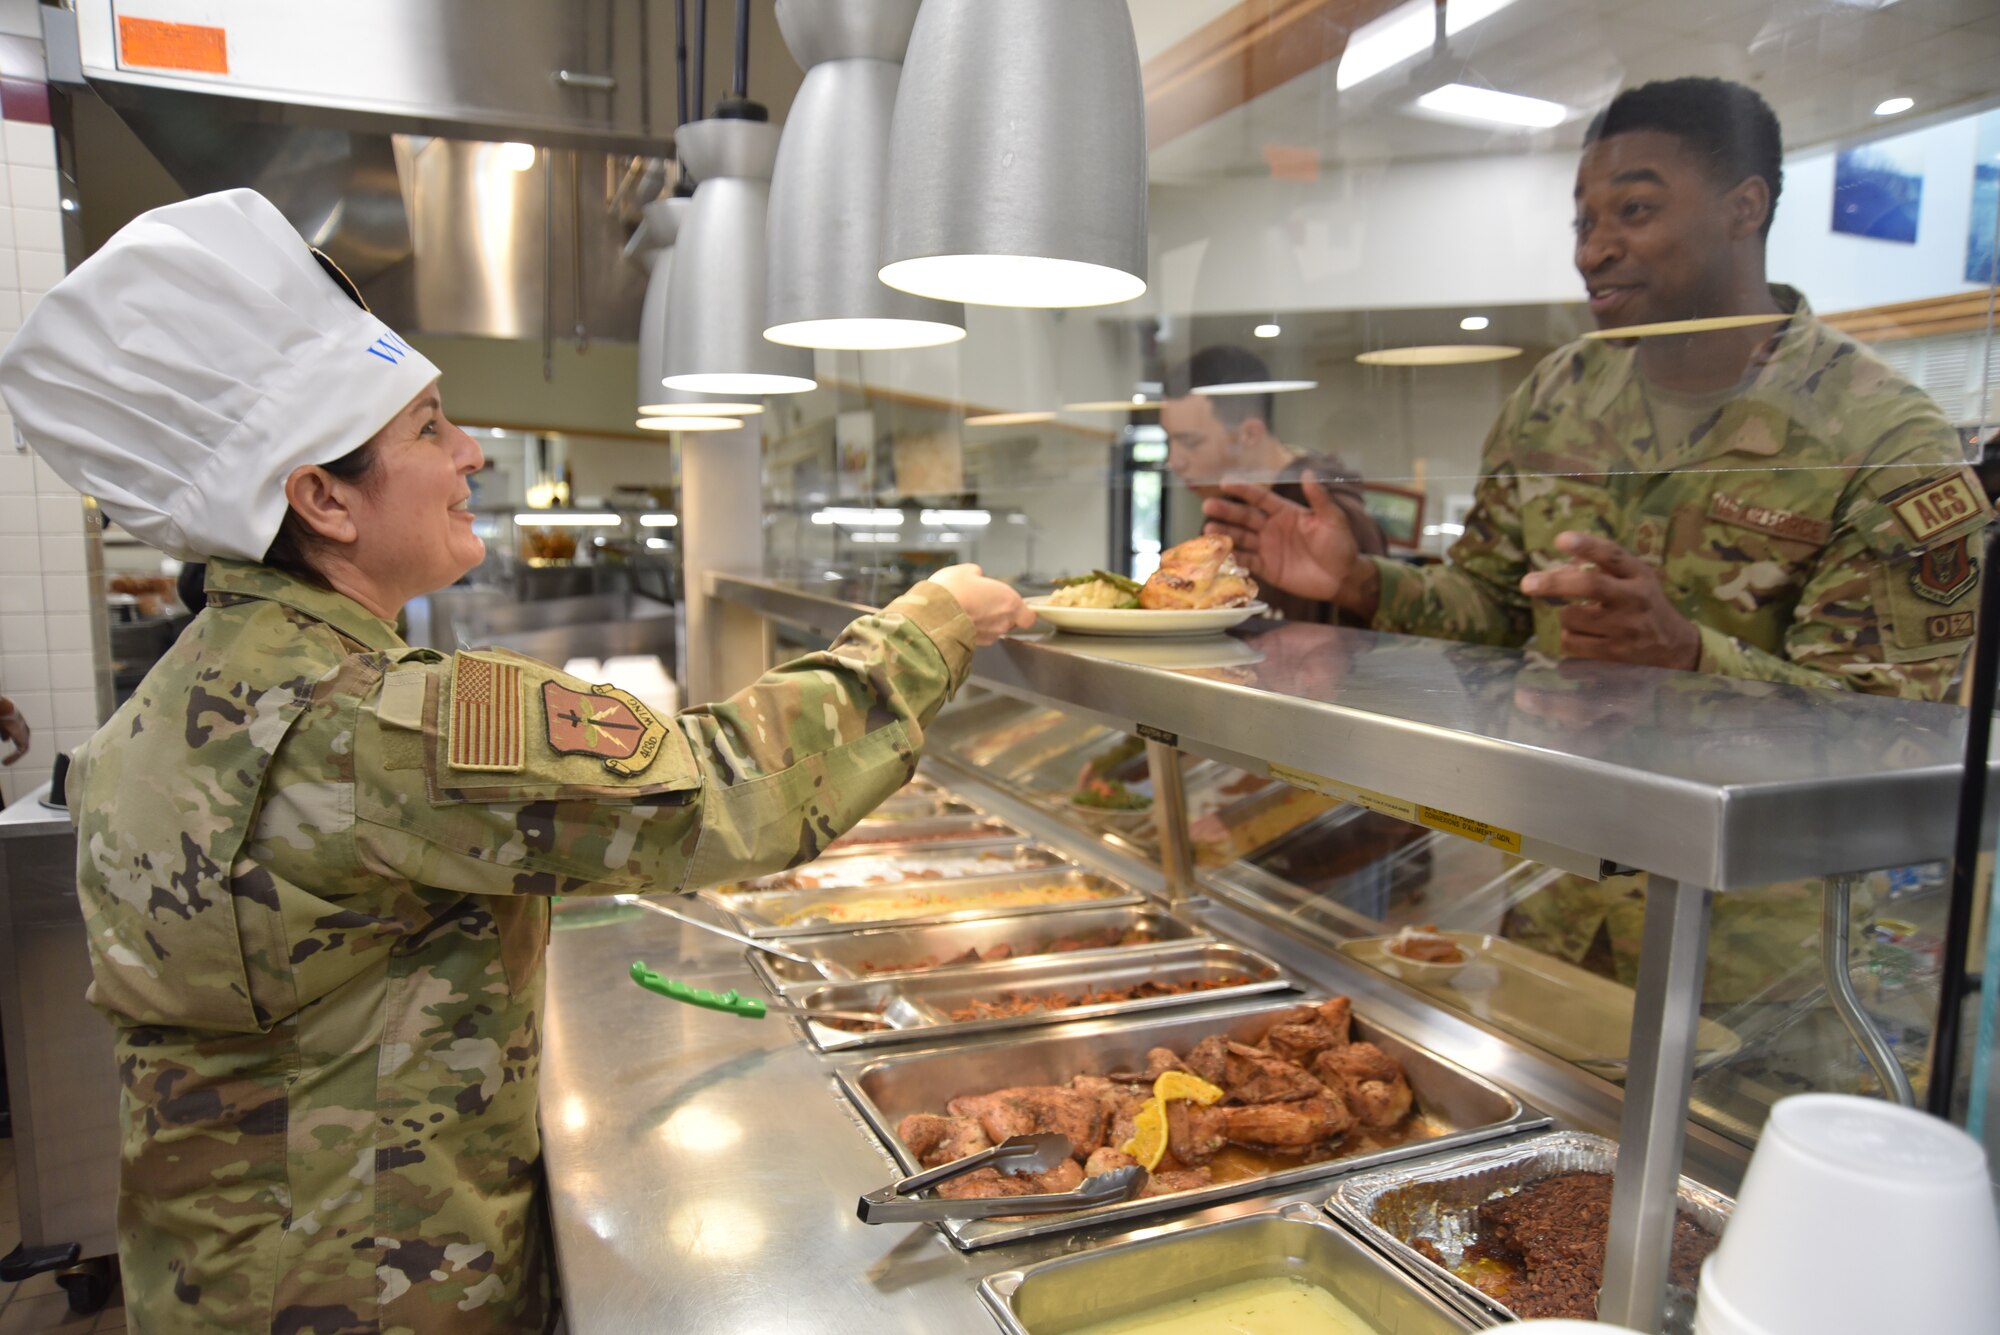 Chief Master Sgt. Barbara J. Gilmore hands a plate of food to an Airman.